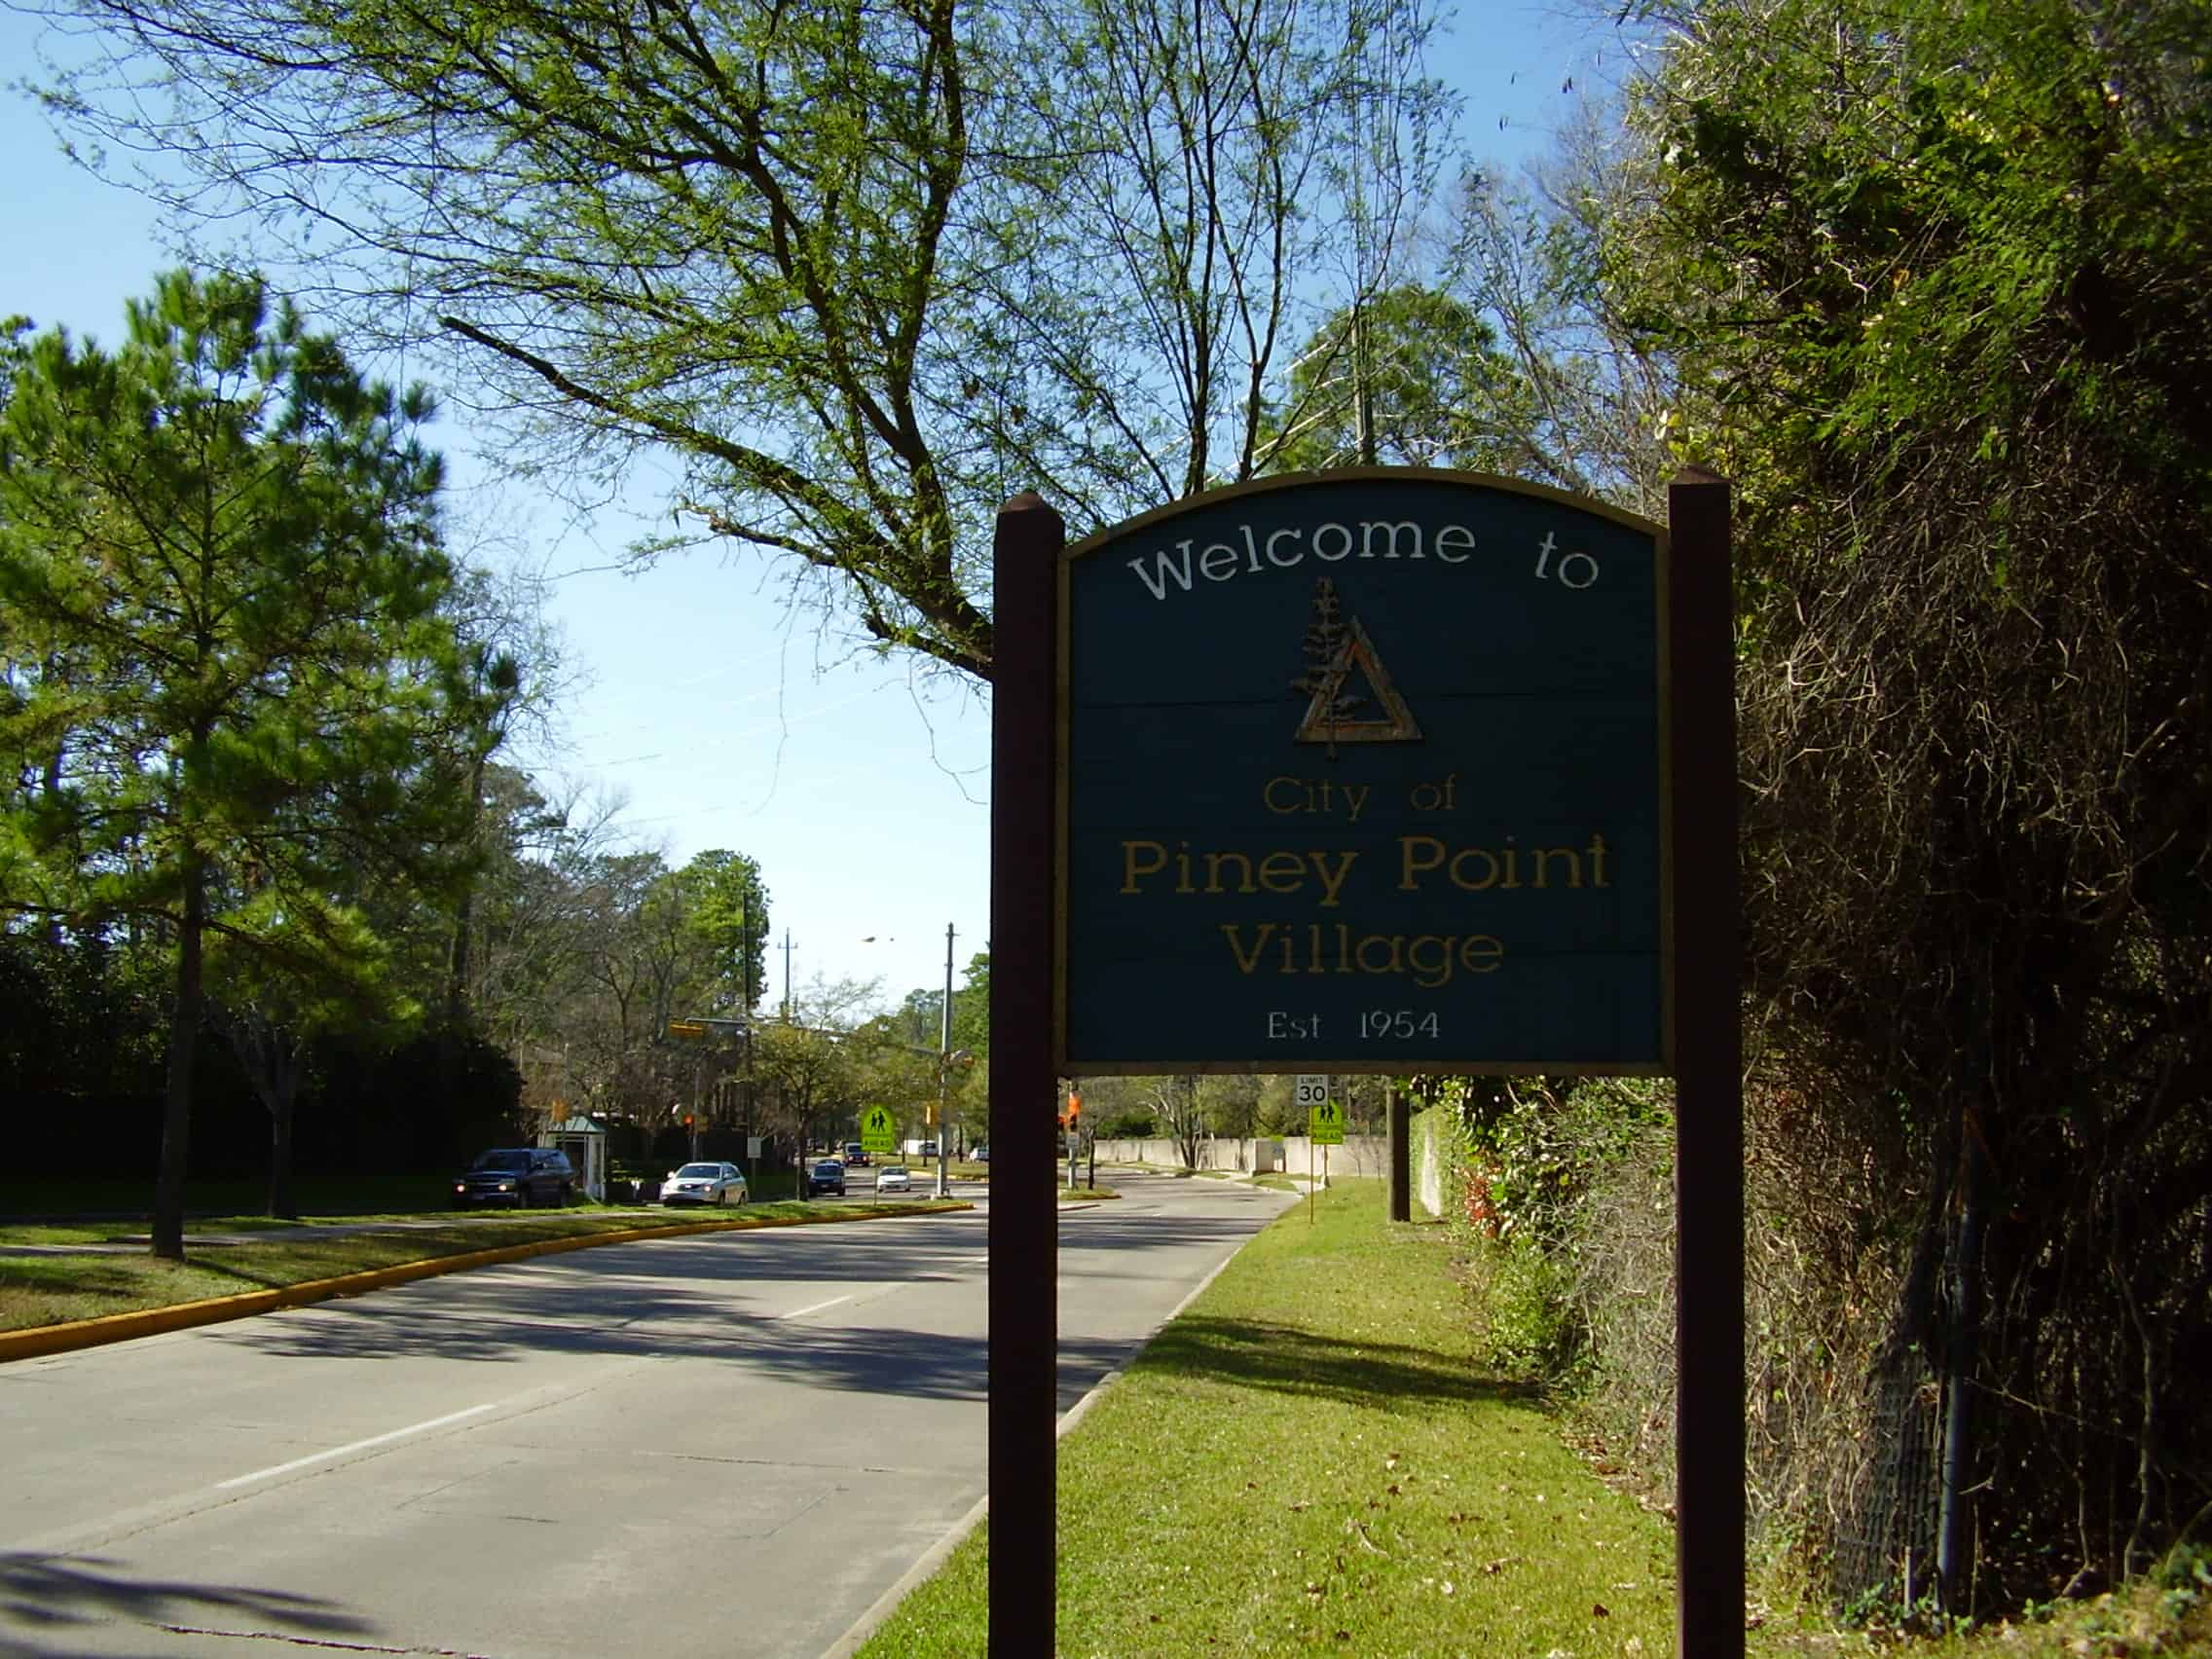 <p>Earning an A+ rating for retirees from Niche, Piney Point Village is a great place to live. Located near Houston, you get excellent weather, a strong nightlife, and plenty of ways to stay active. Plus, a population of only 3,114 people ensures you keep the small-town feeling you've been after. Just over 22% of residents are aged 65 and over.</p> <p>Agree with this? Hit the Thumbs Up button above. Disagree? Let us know in the comments with what you'd change.</p>